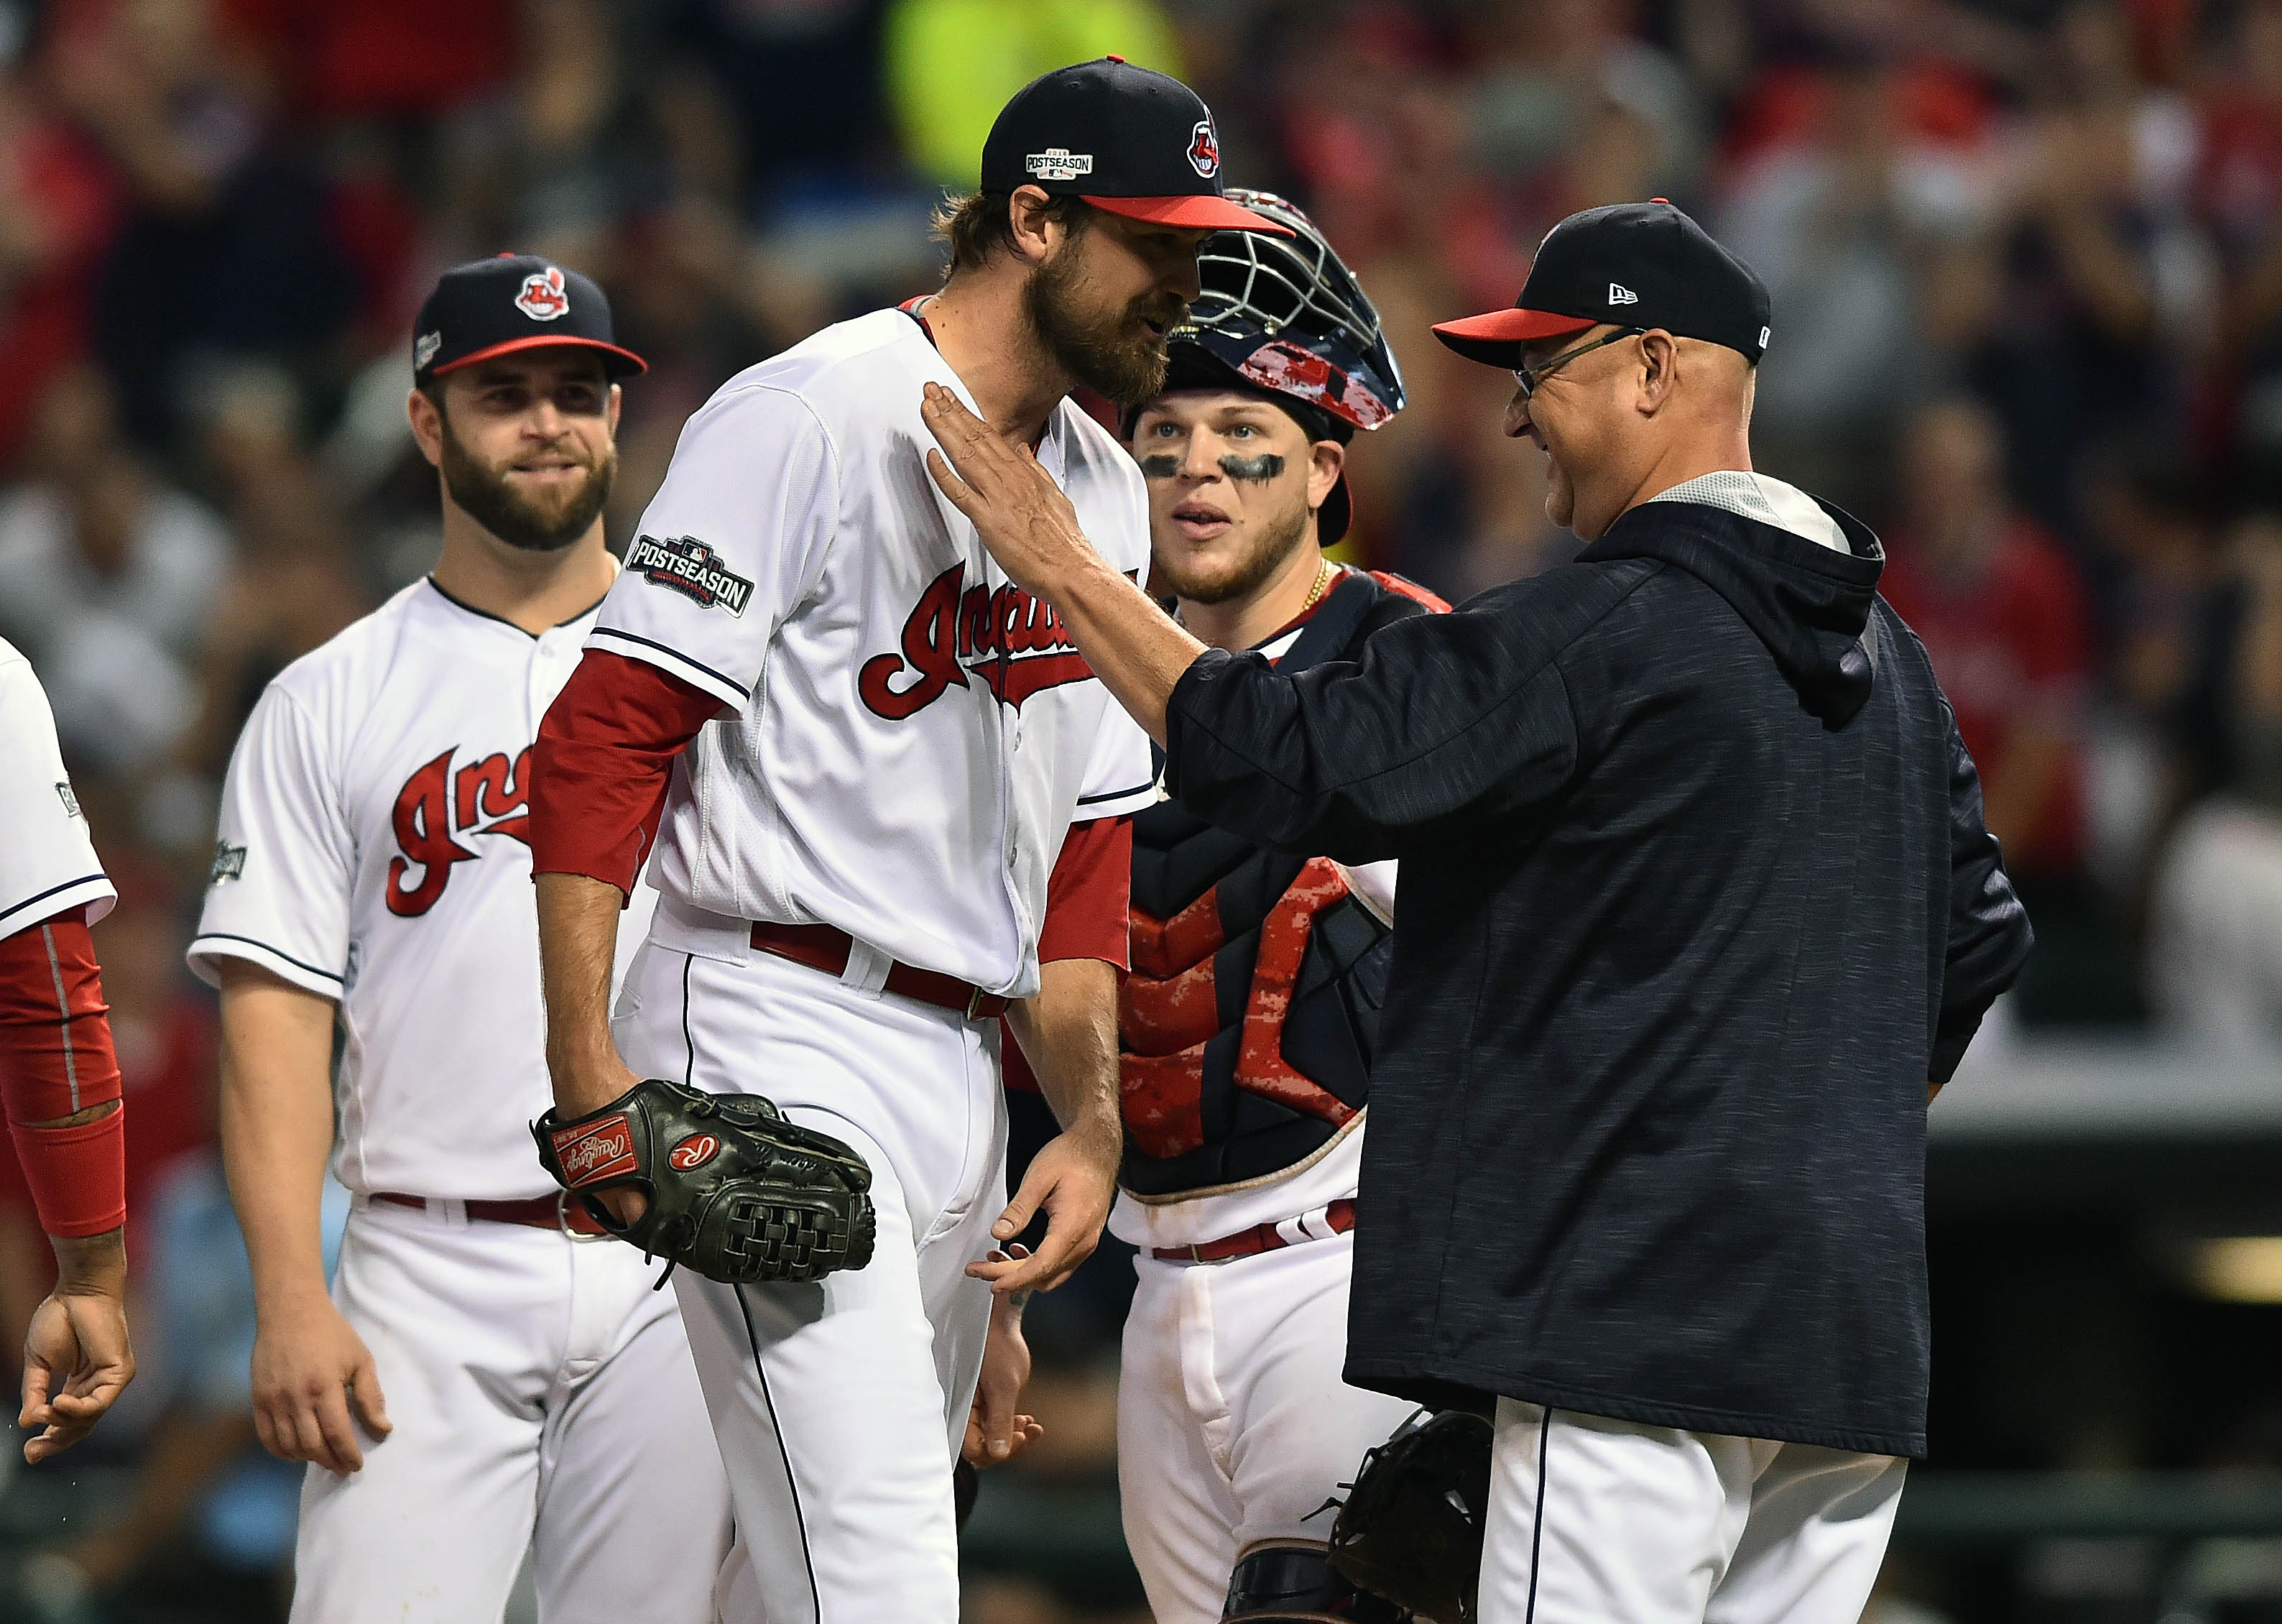 Terry Francona says it's never okay to throw things onto the field 